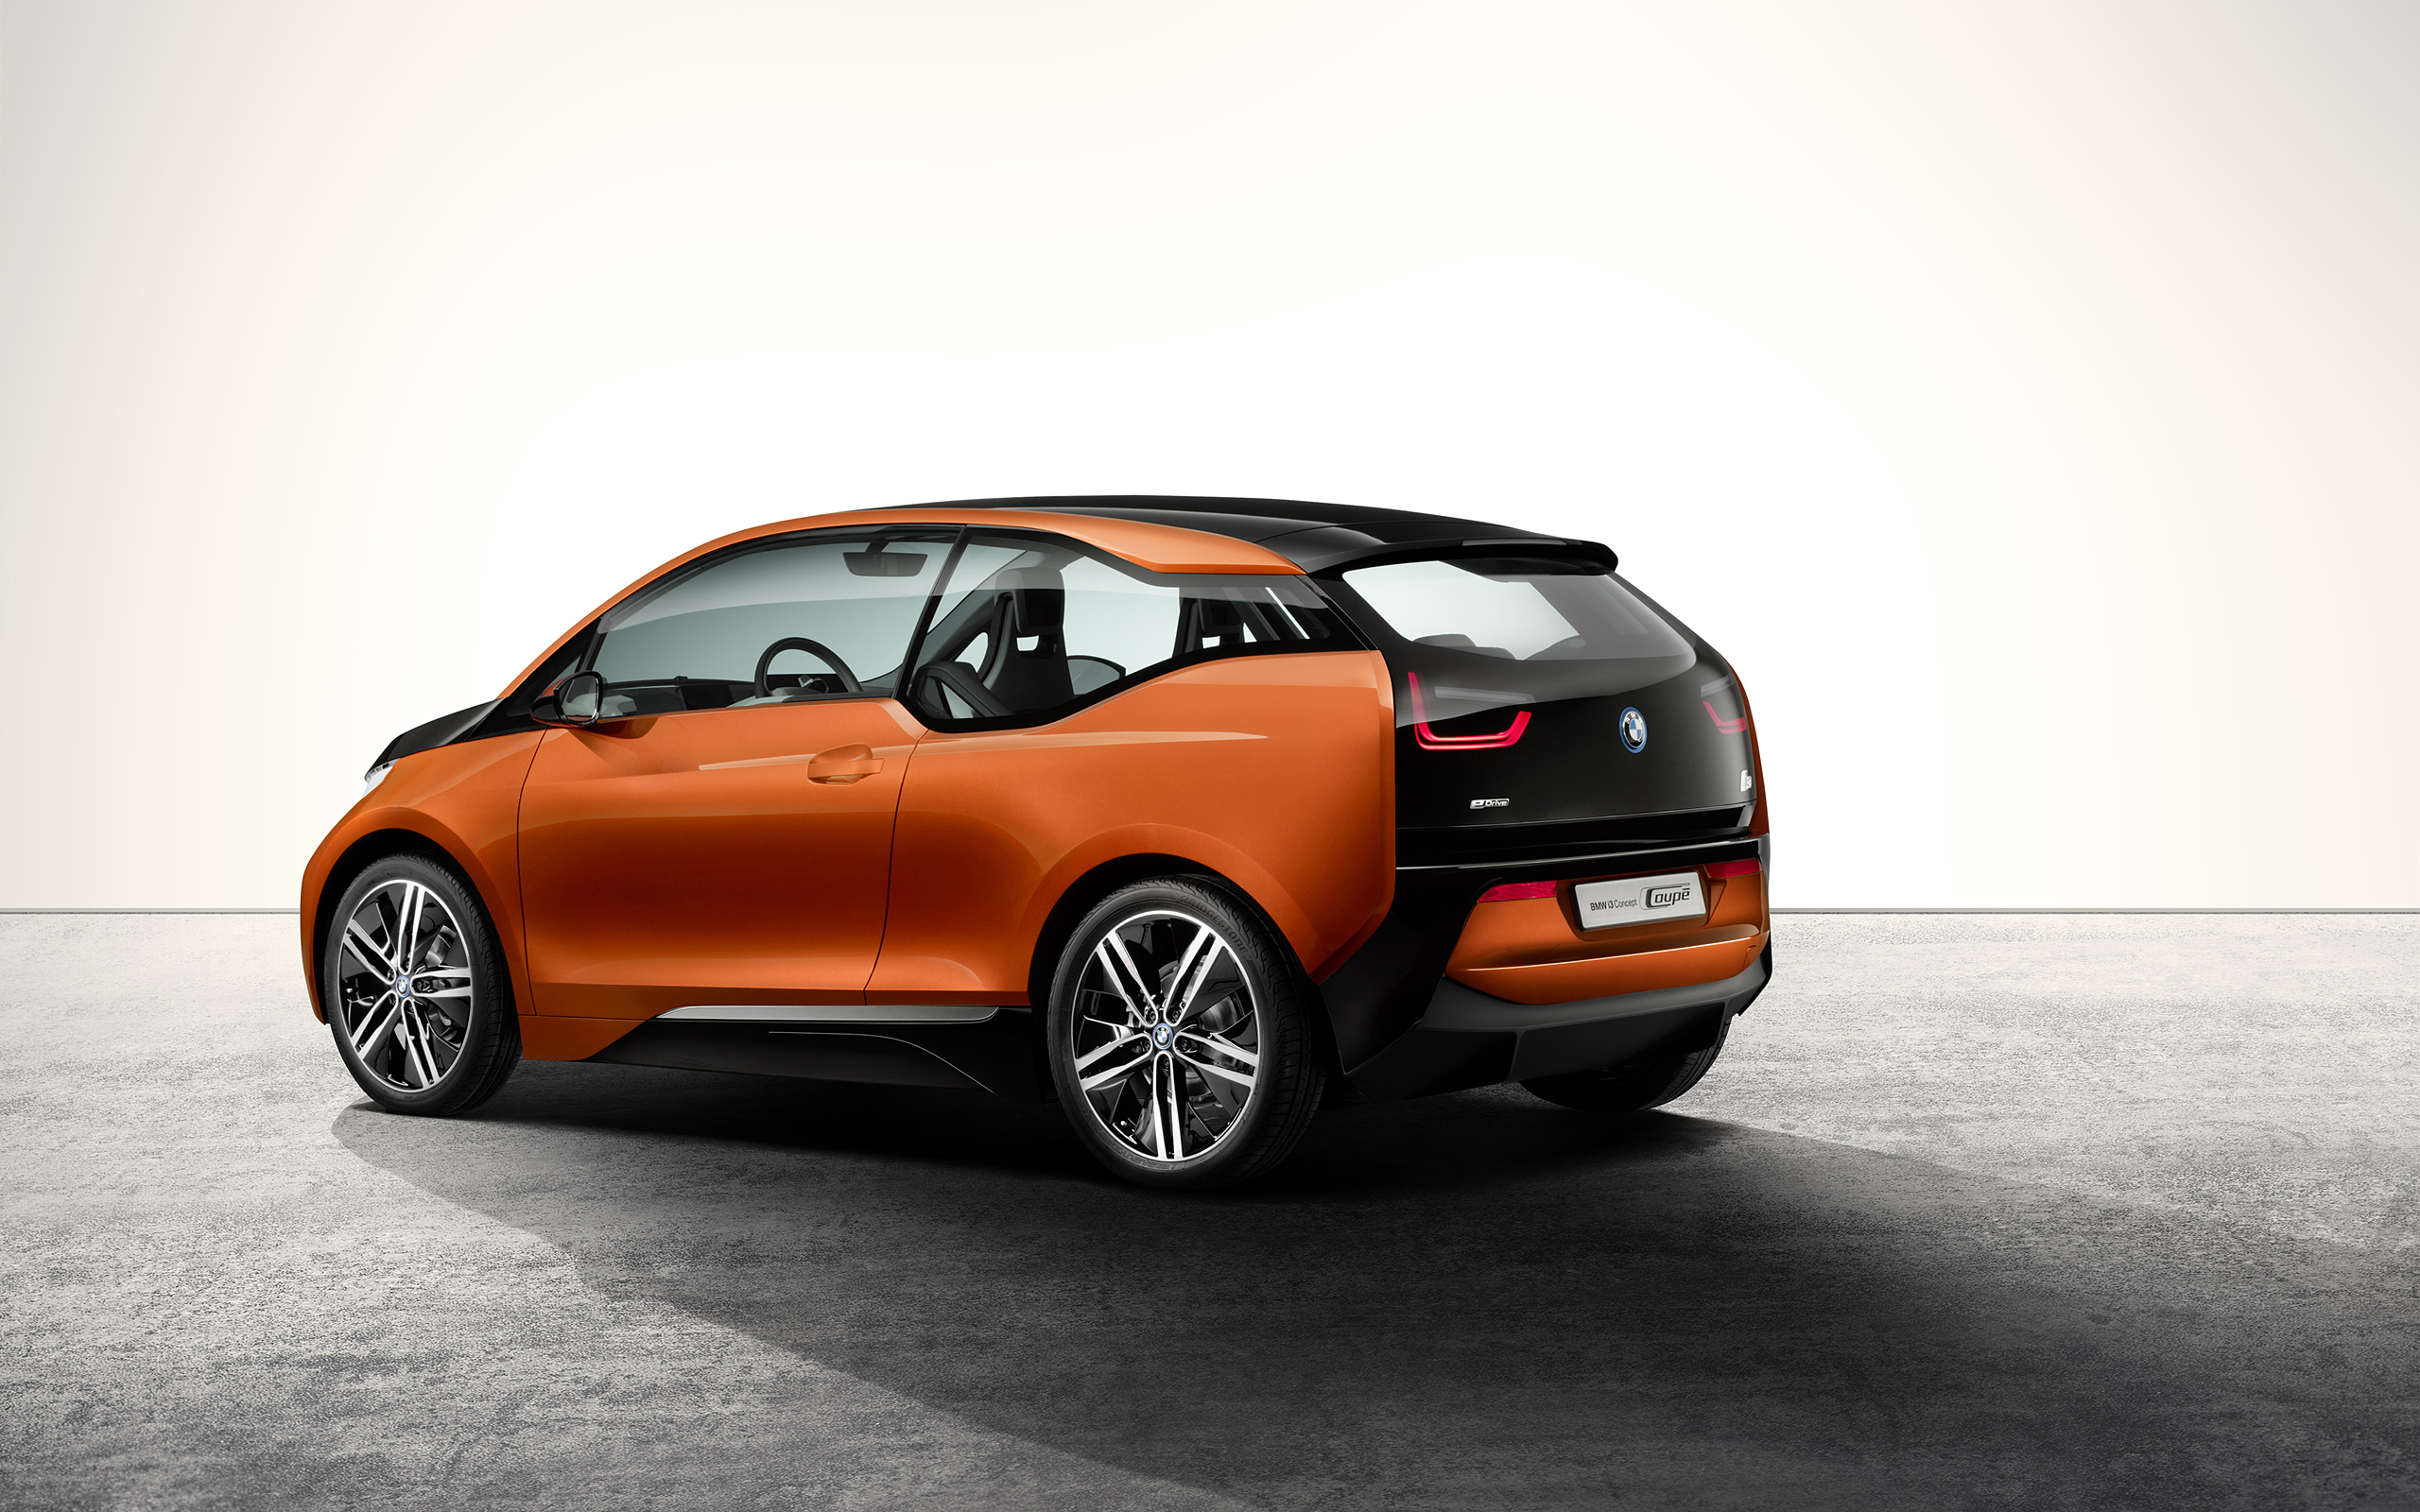  2012 BMW i3 Coupe Concept Wallpaper.